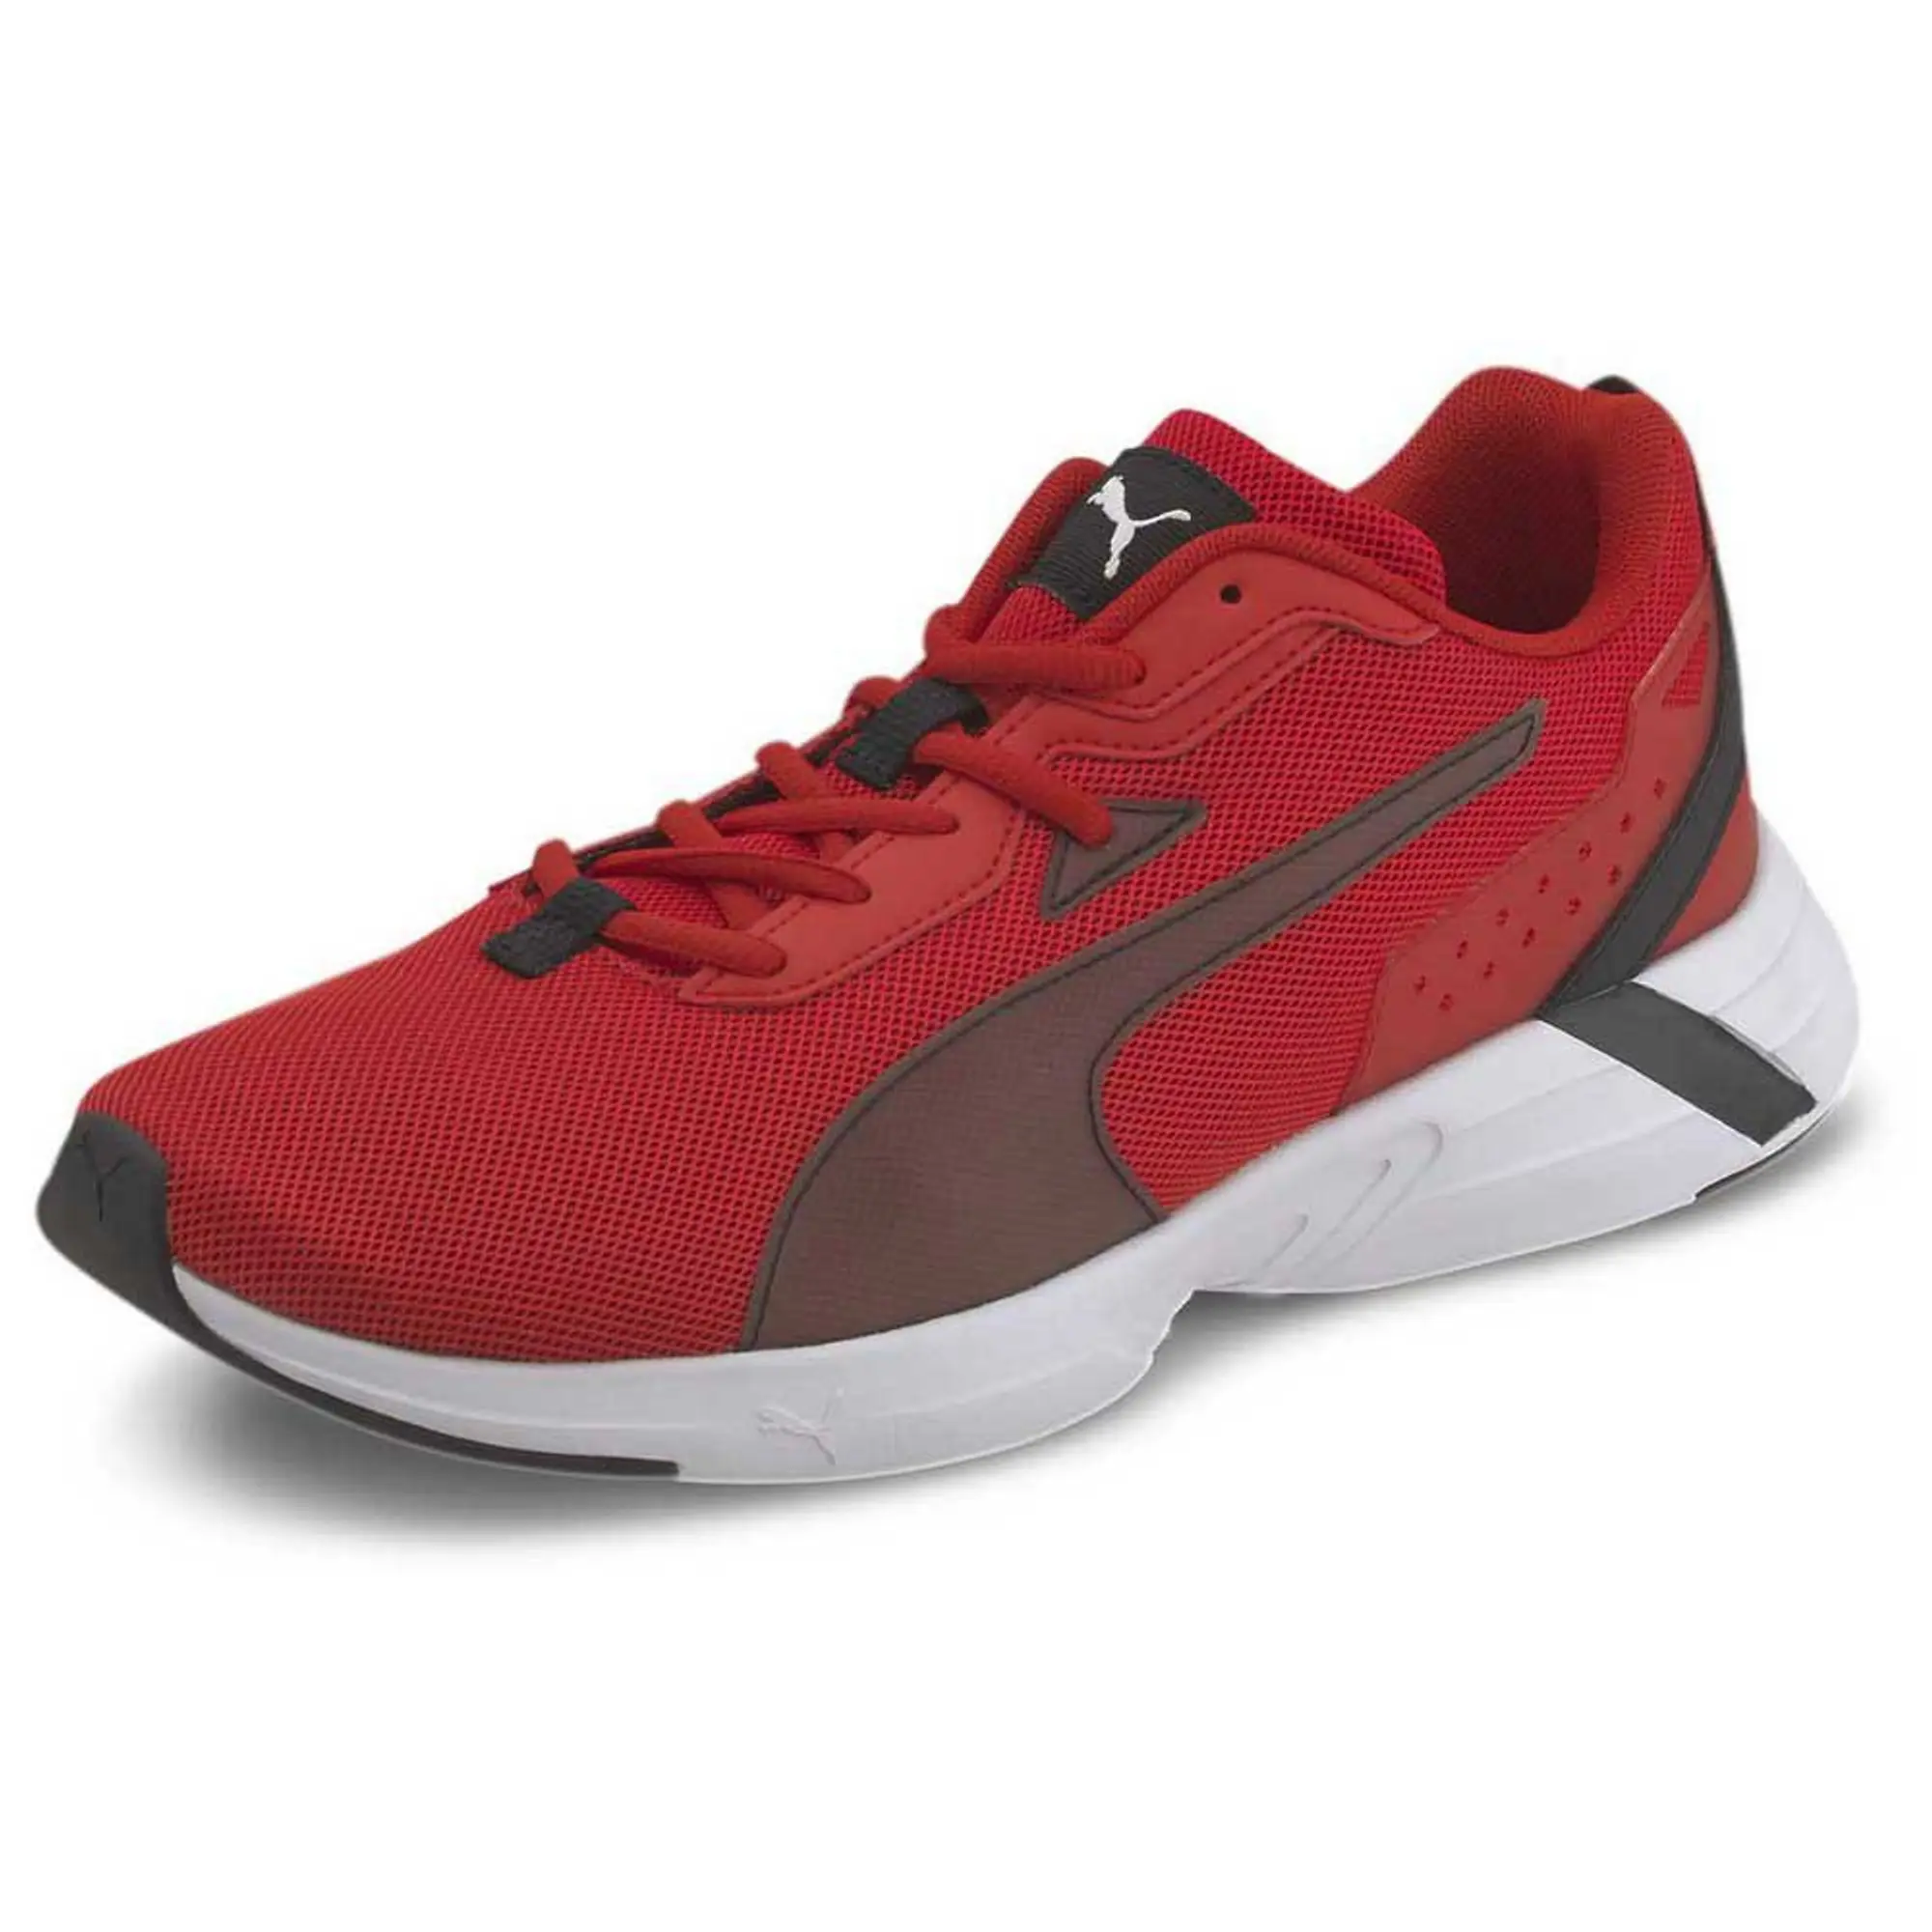 Puma Space Runner Running Shoes  - Red